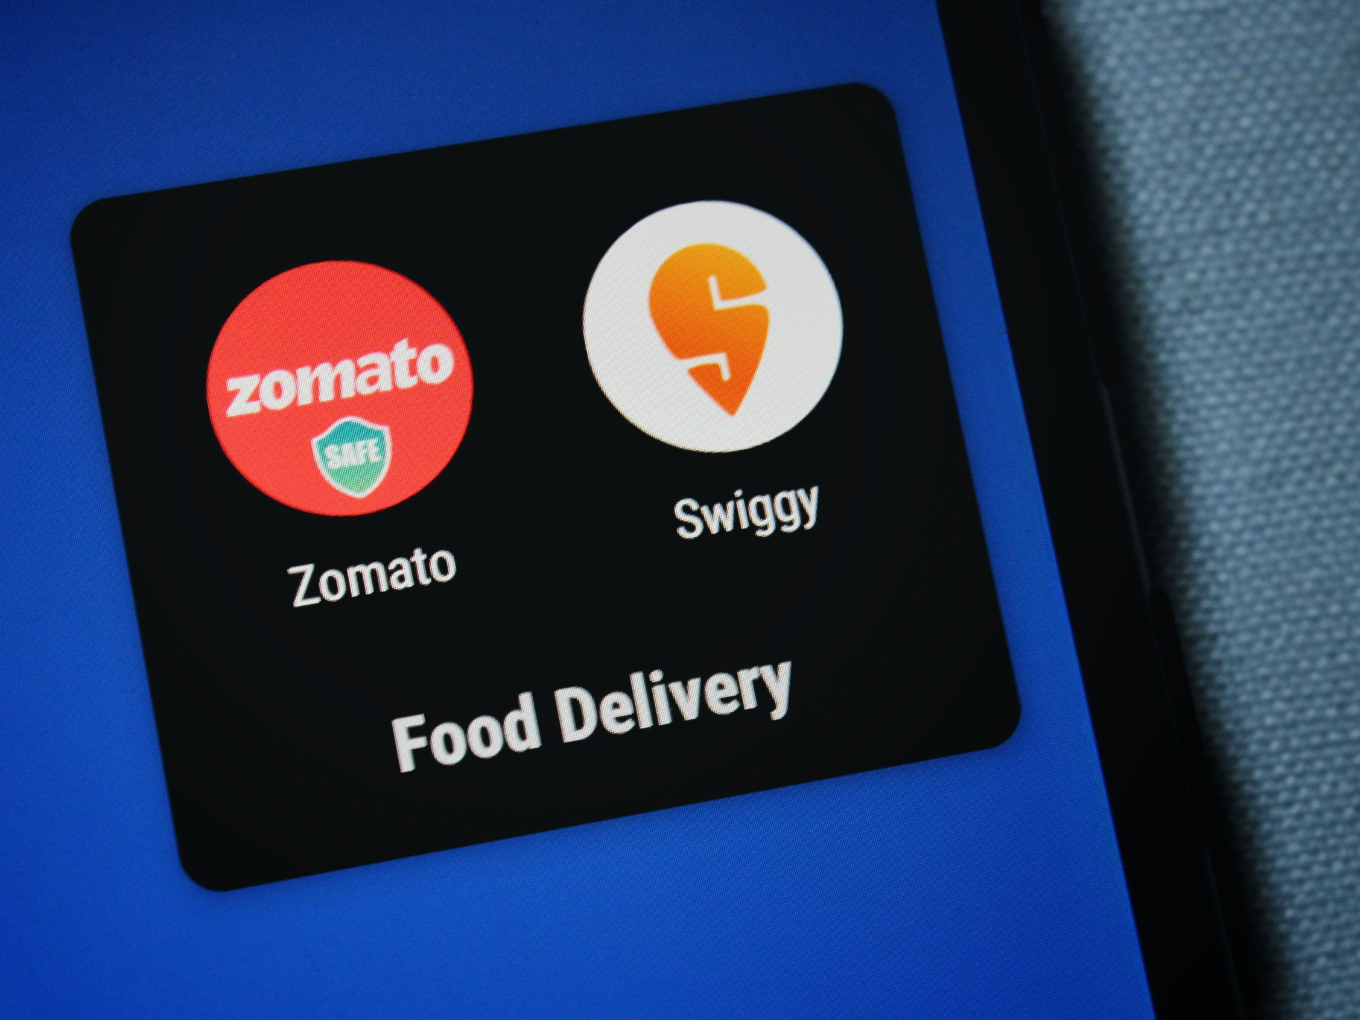 List of Startups Acquired by Swiggy | Data driven marketing, Startup news,  Marketing approach